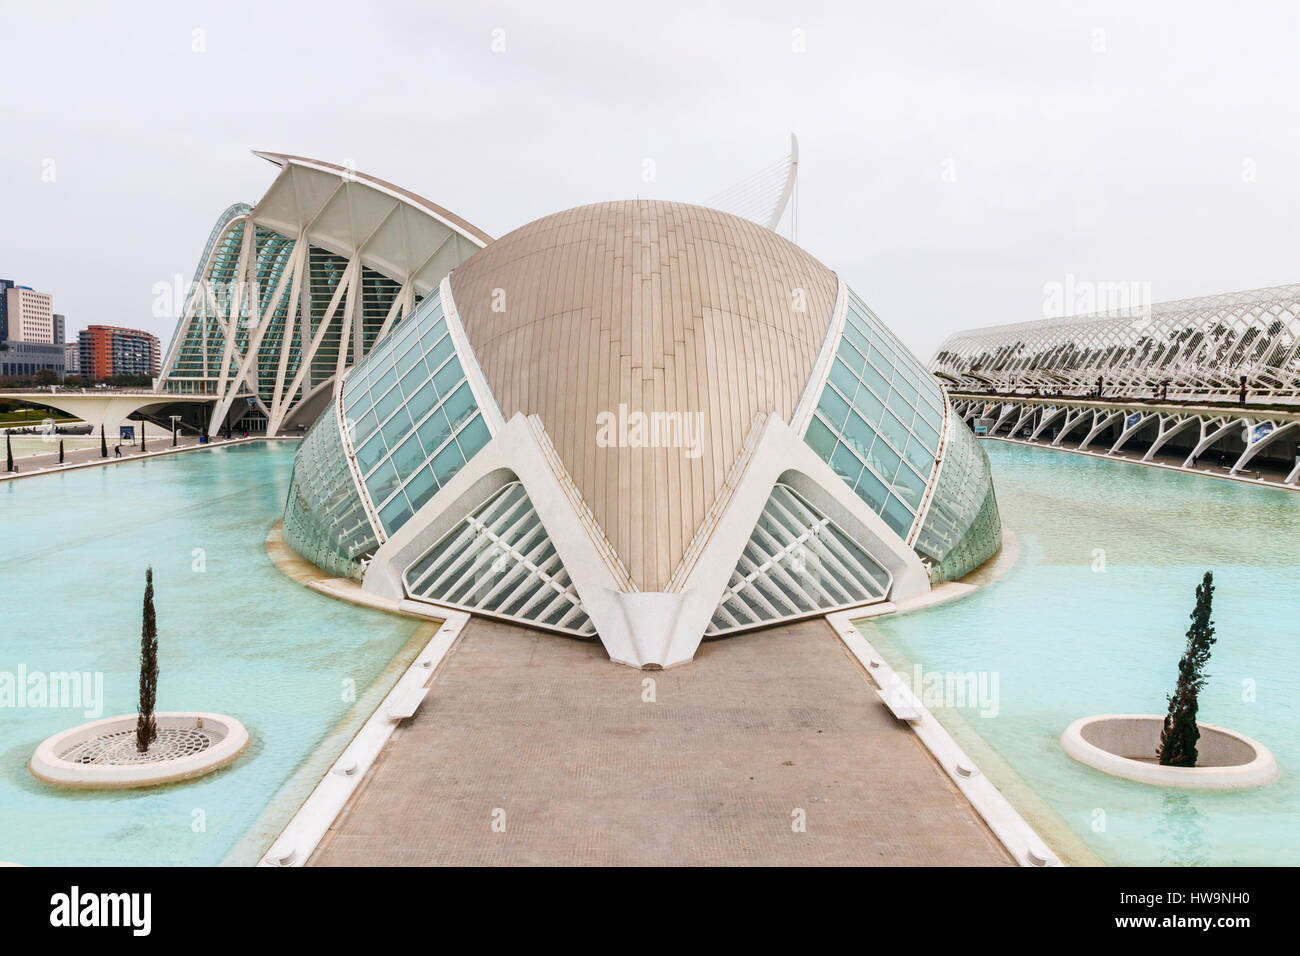 L'Hemisferic, part of the City of Arts and Sciences with L'Umbracle and Museu de les Ciencies Principe Felipe at the background. Valencia, Spain. Stock Photo